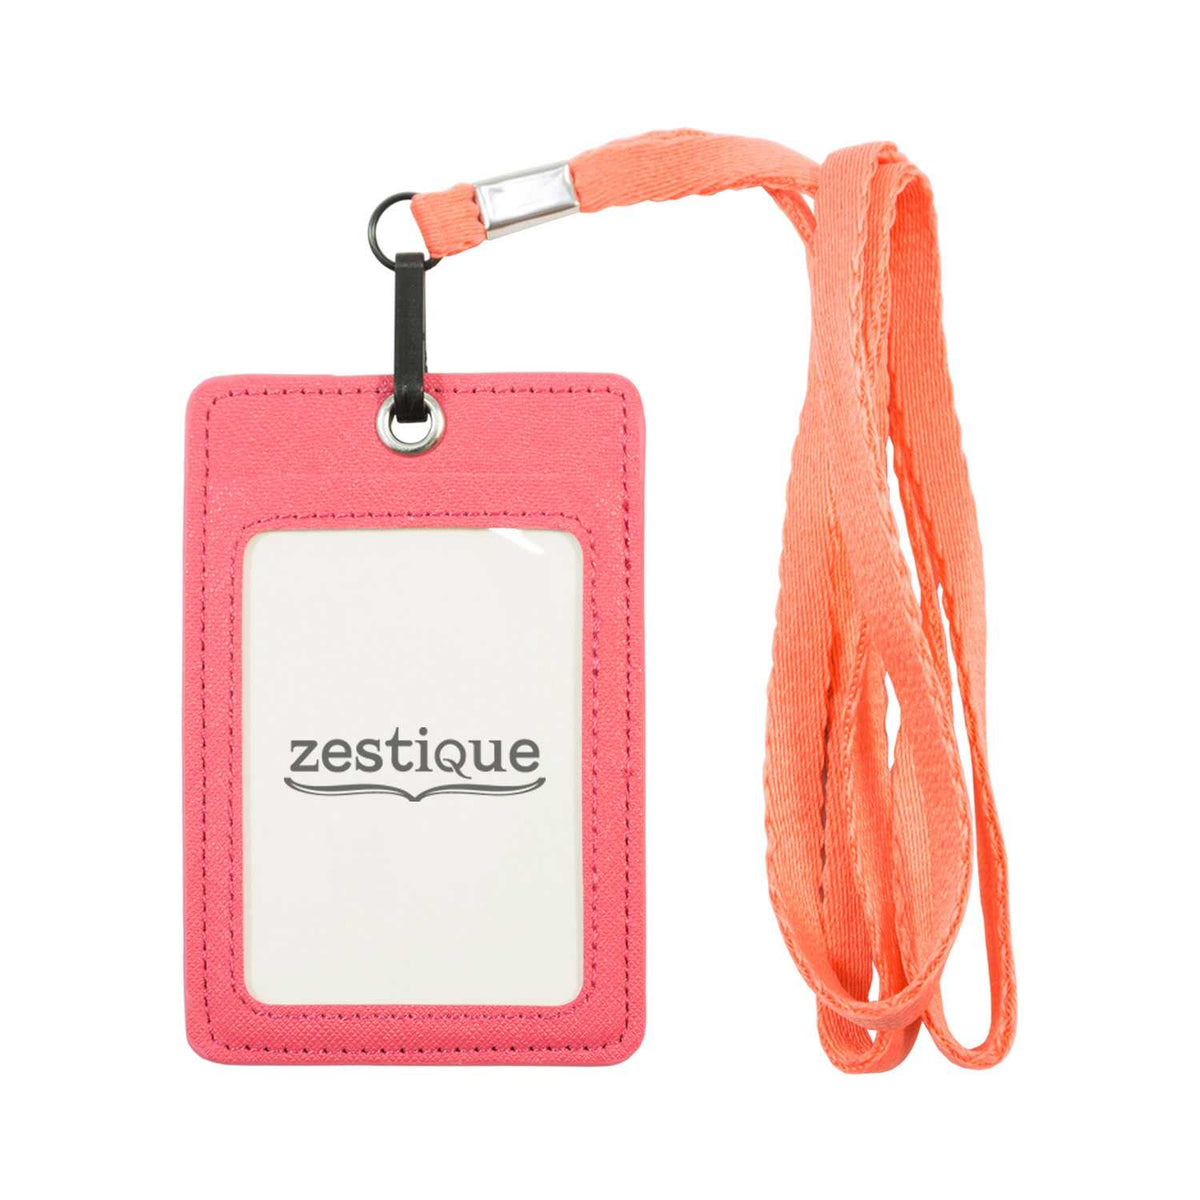 Unisex ID & Credit Cards Holder Wallet with Lanyard - Pink - Zestique